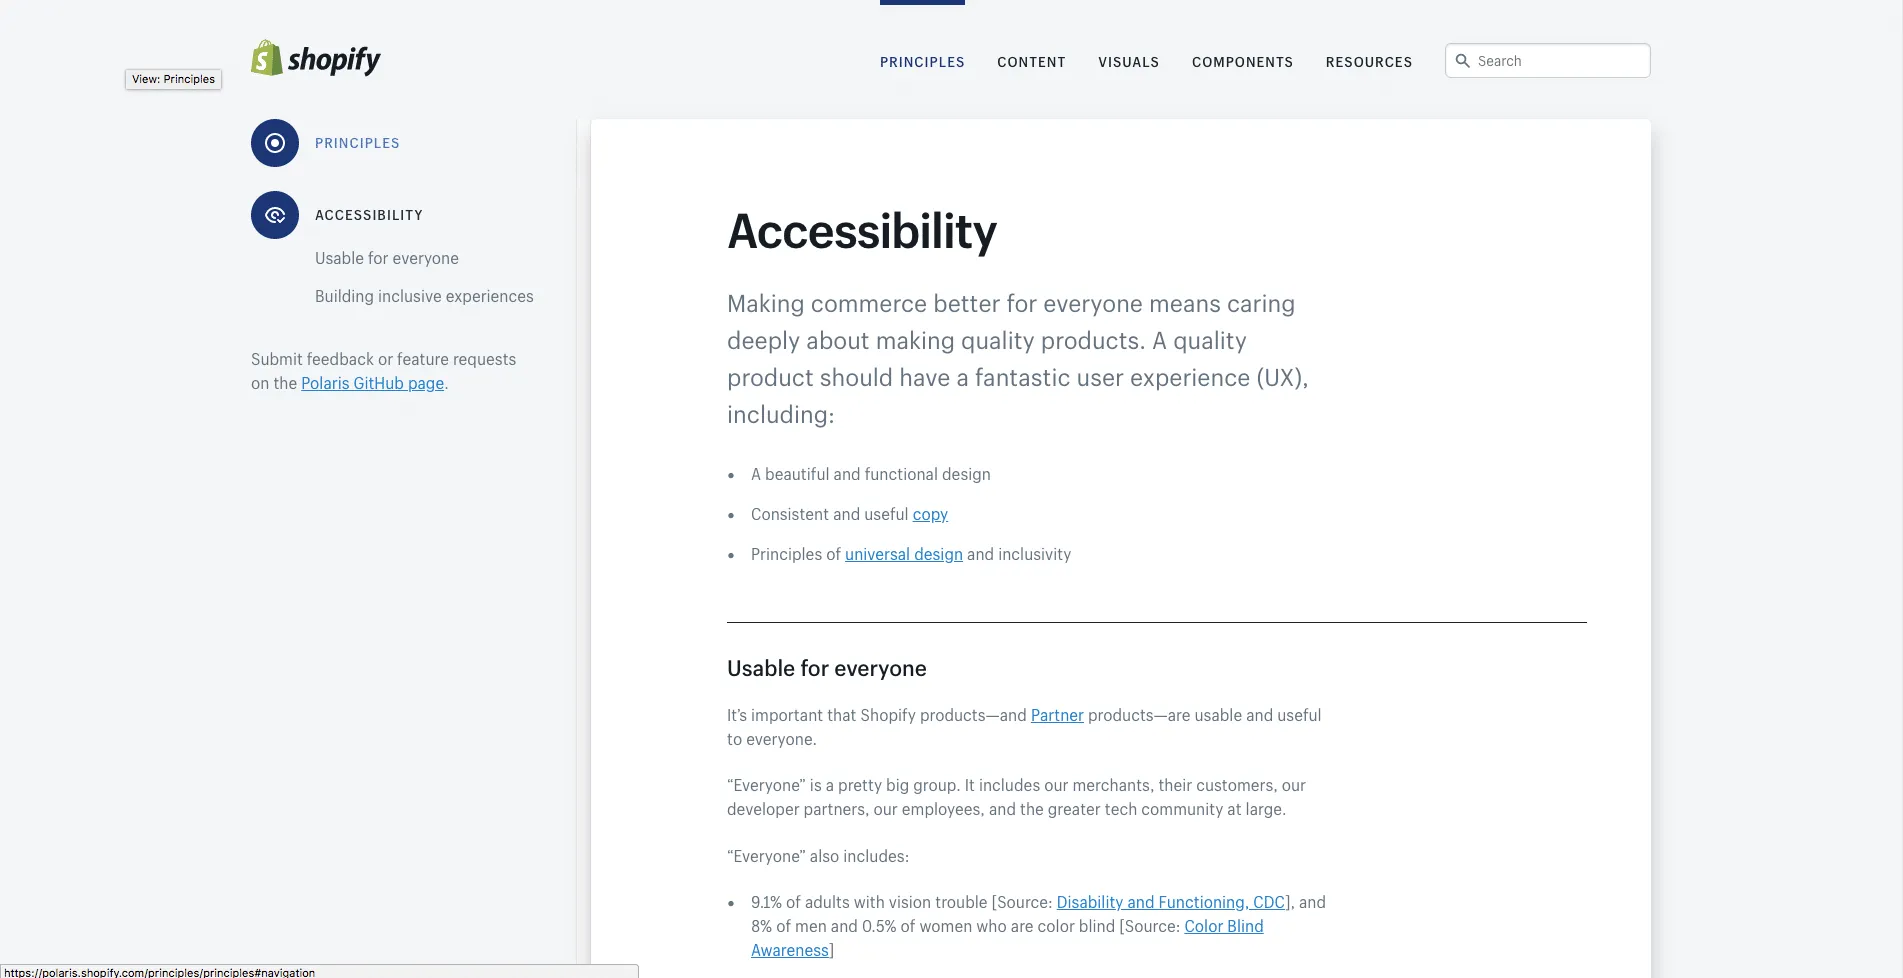 Principles for accessibility